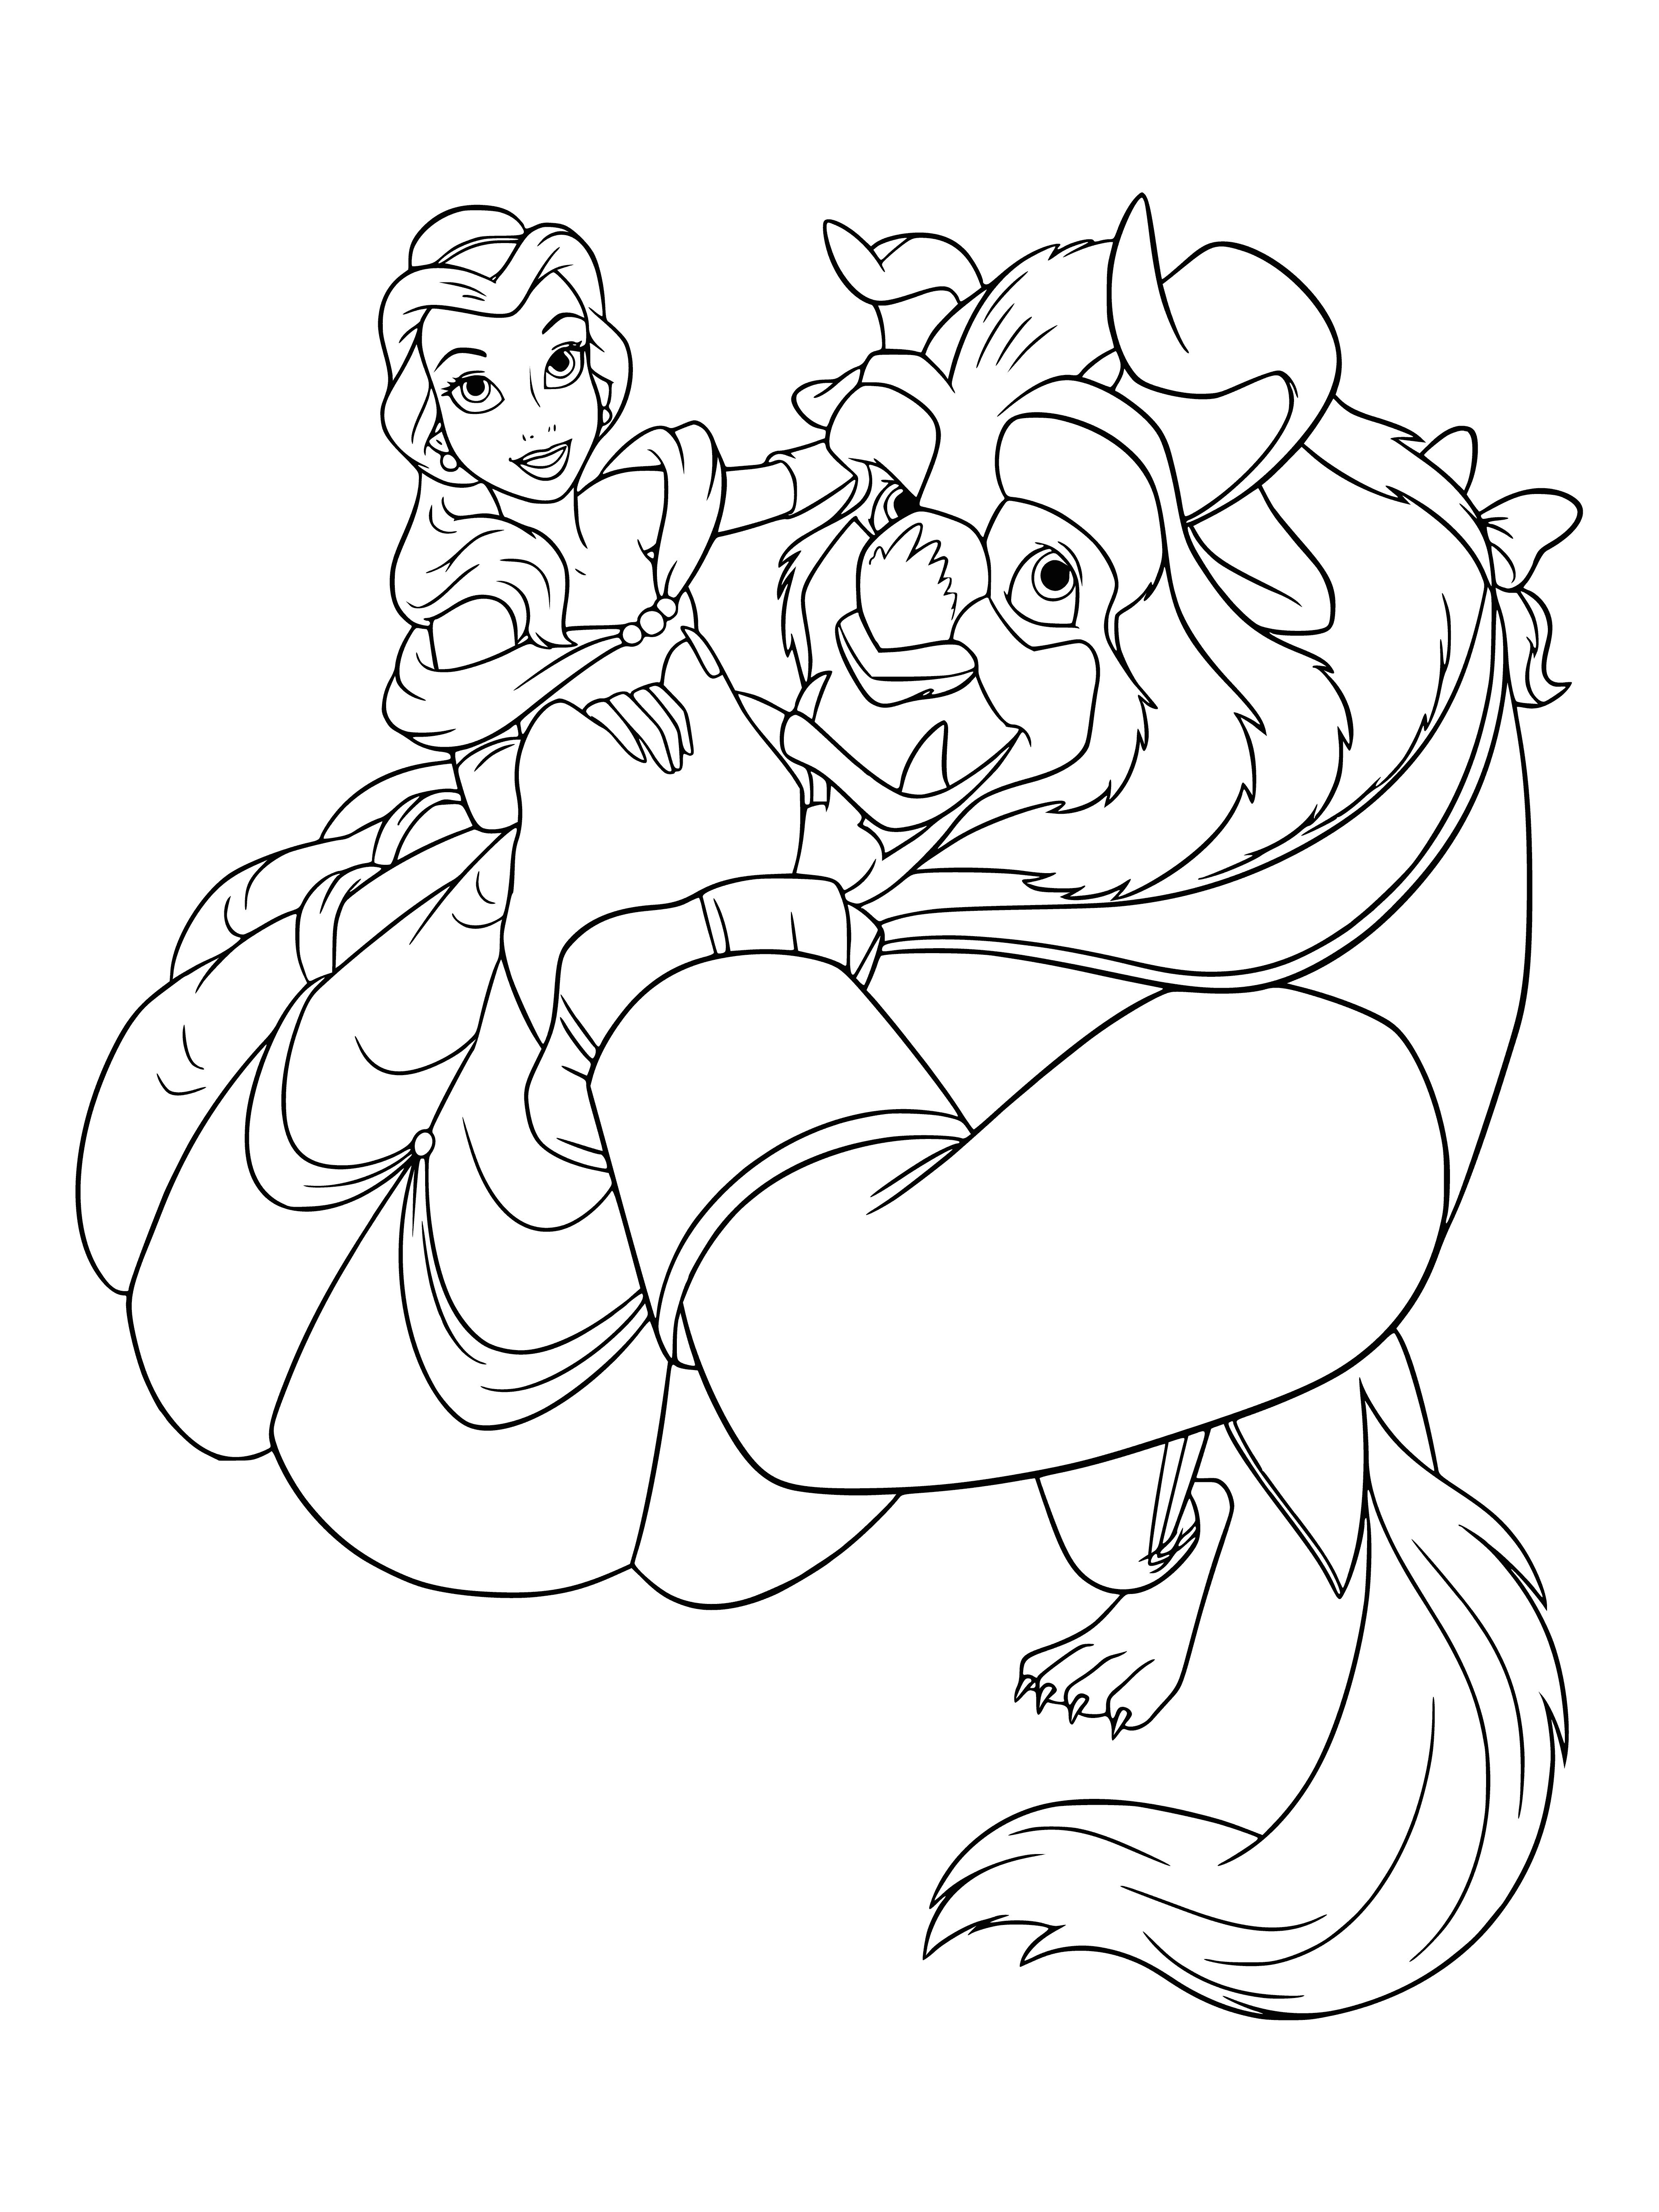 coloring page: Beast & Belle stand with arms raised, smiling. He in red & black, she in yellow & white. Table has white cloth & red rose.